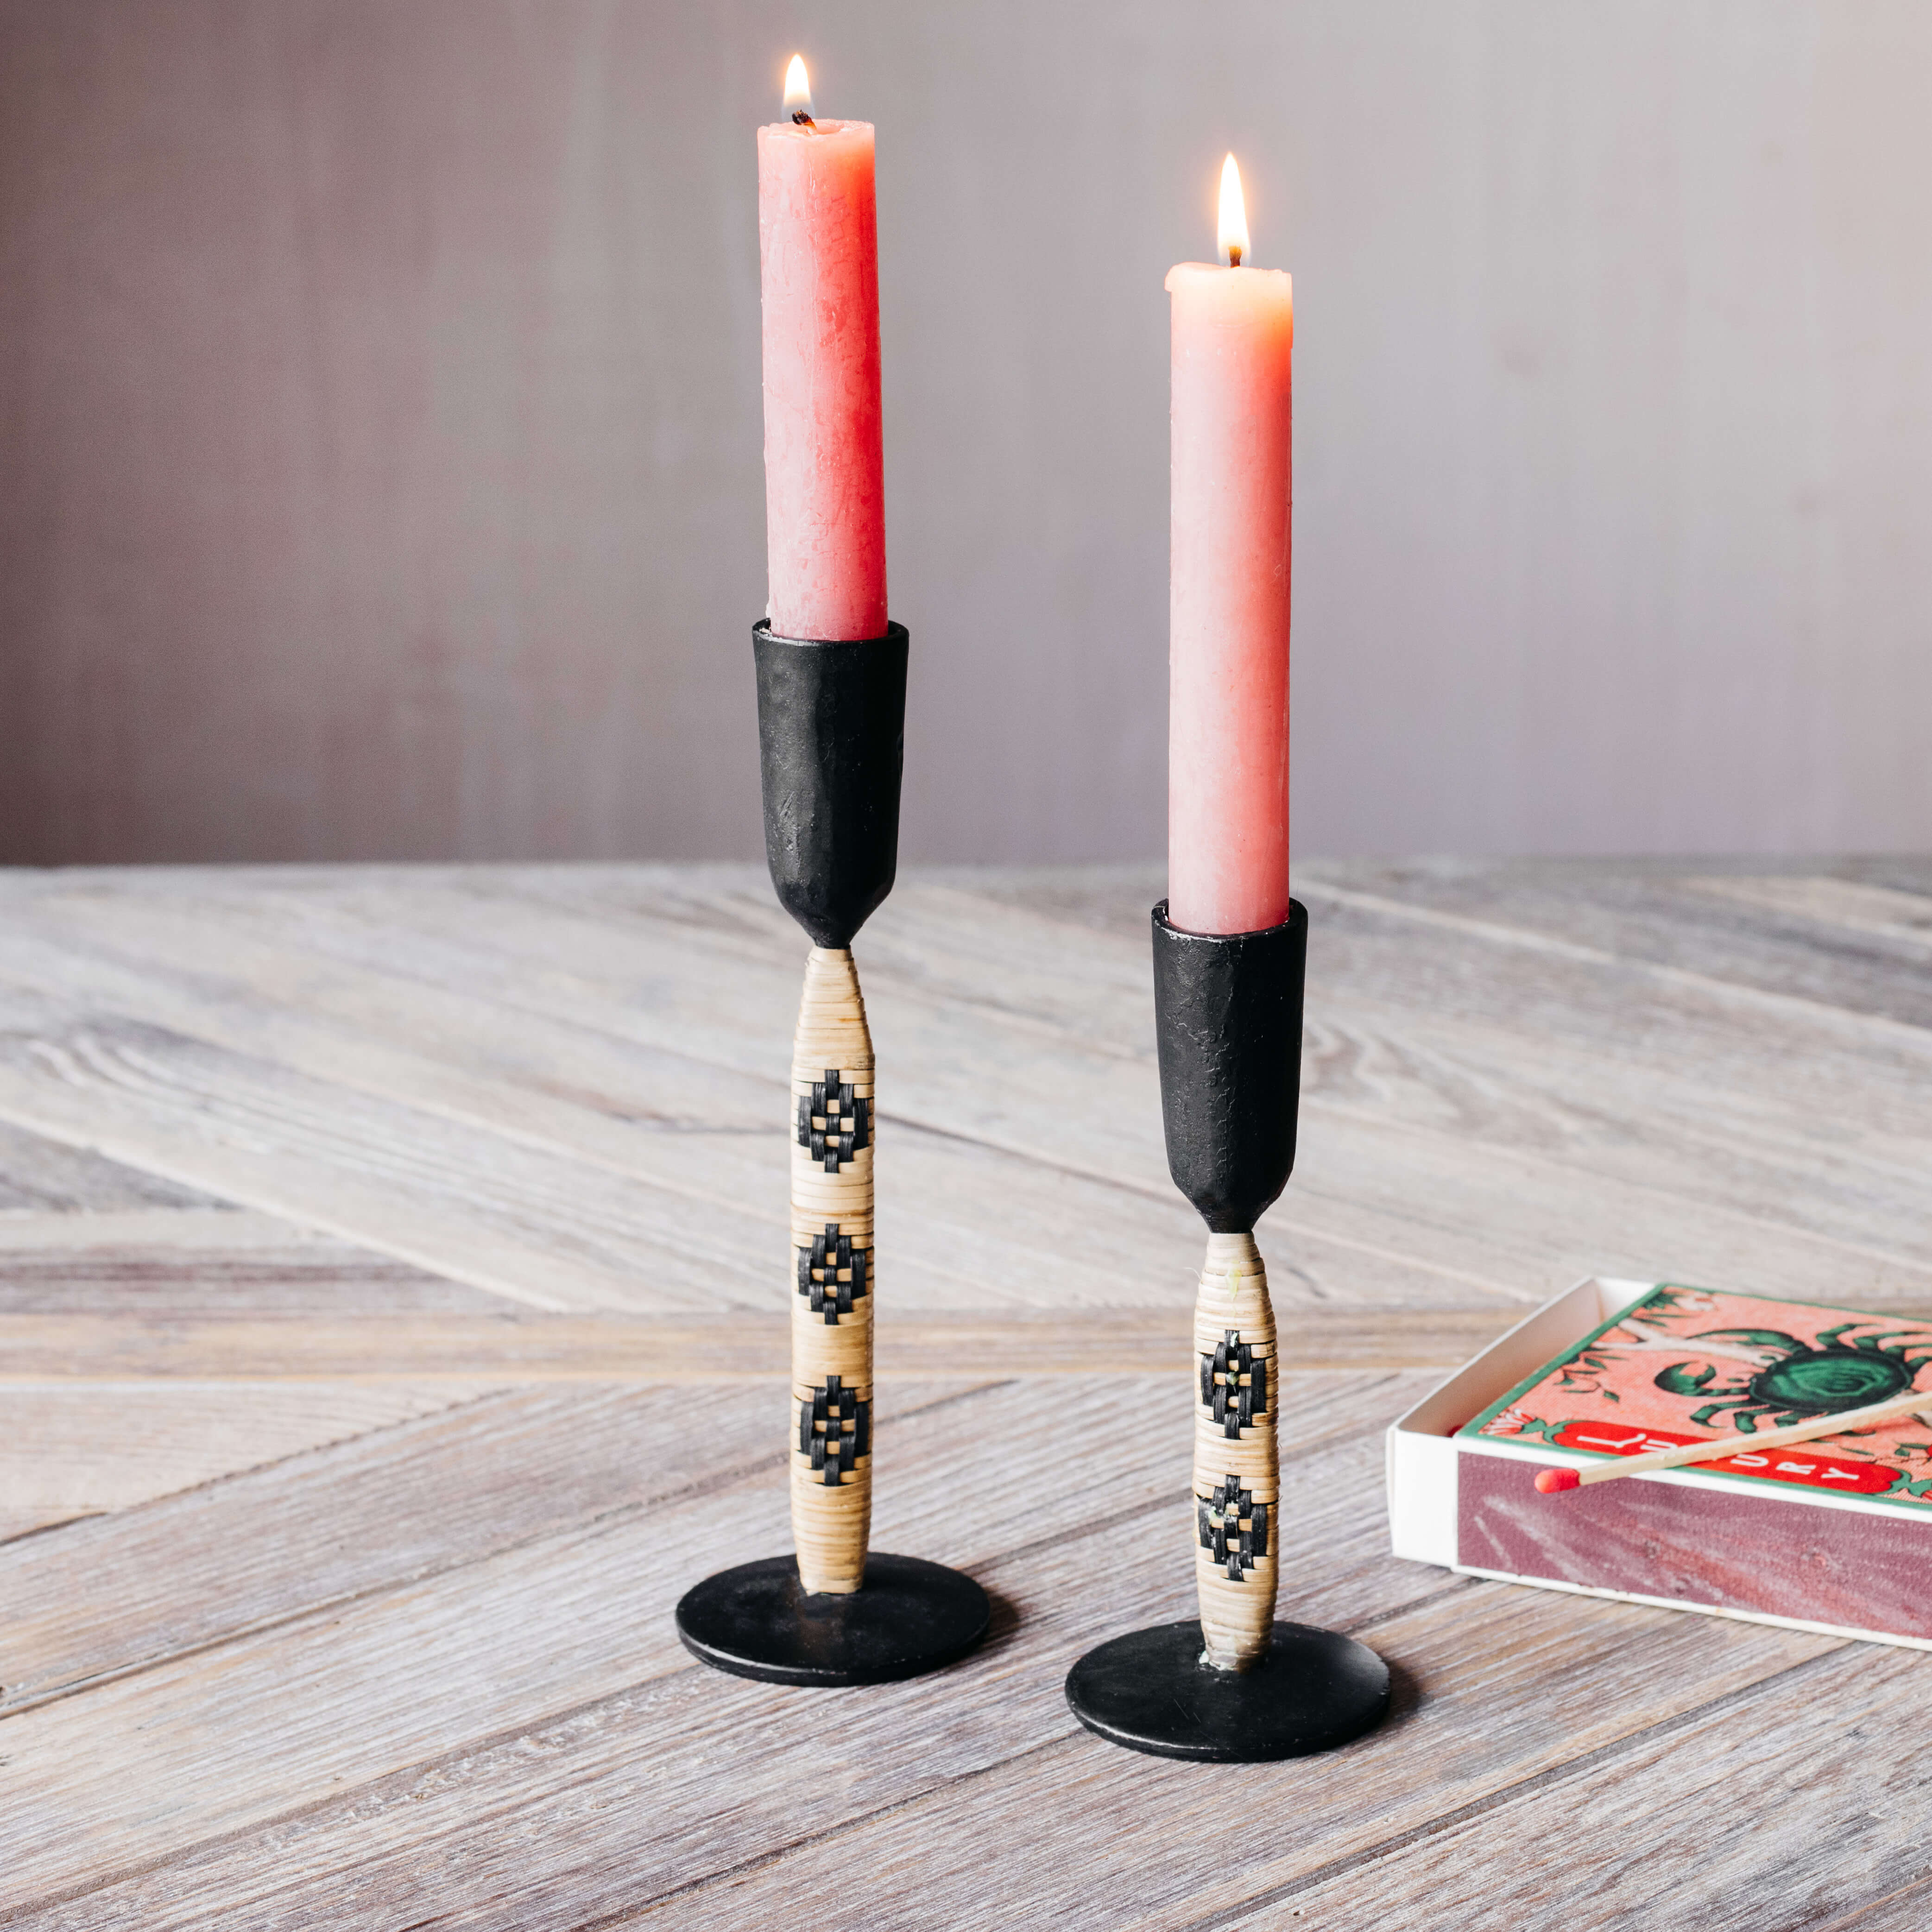 Read more about Graham and green set of two black bamboo candle holders